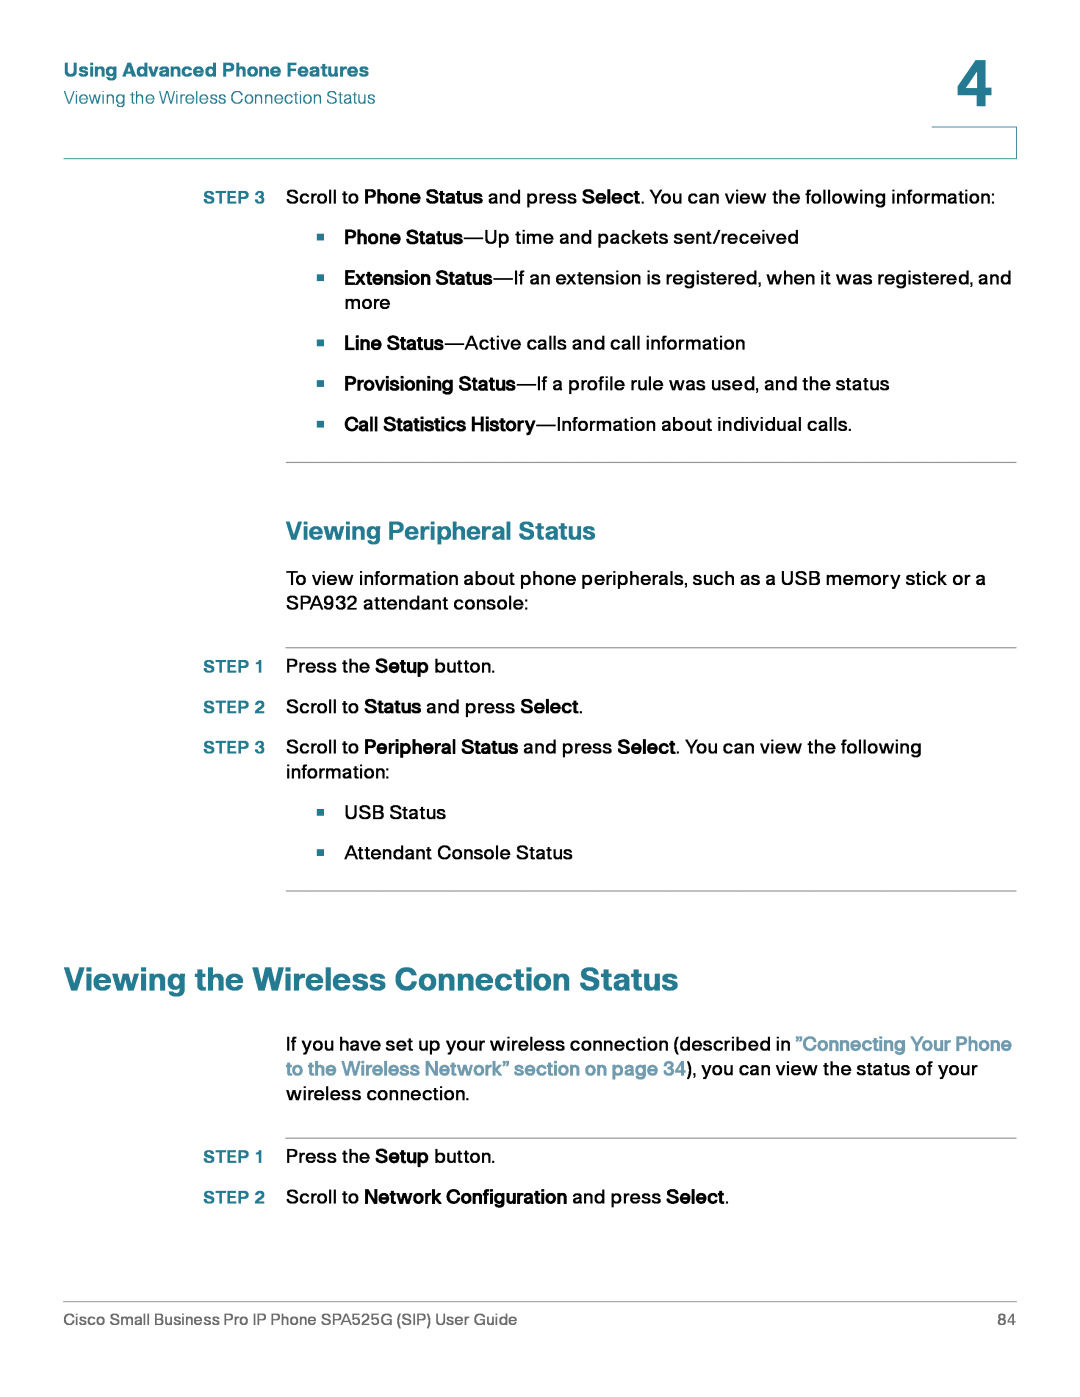 Cisco Systems SPA525G Viewing the Wireless Connection Status, Viewing Peripheral Status, Using Advanced Phone Features 